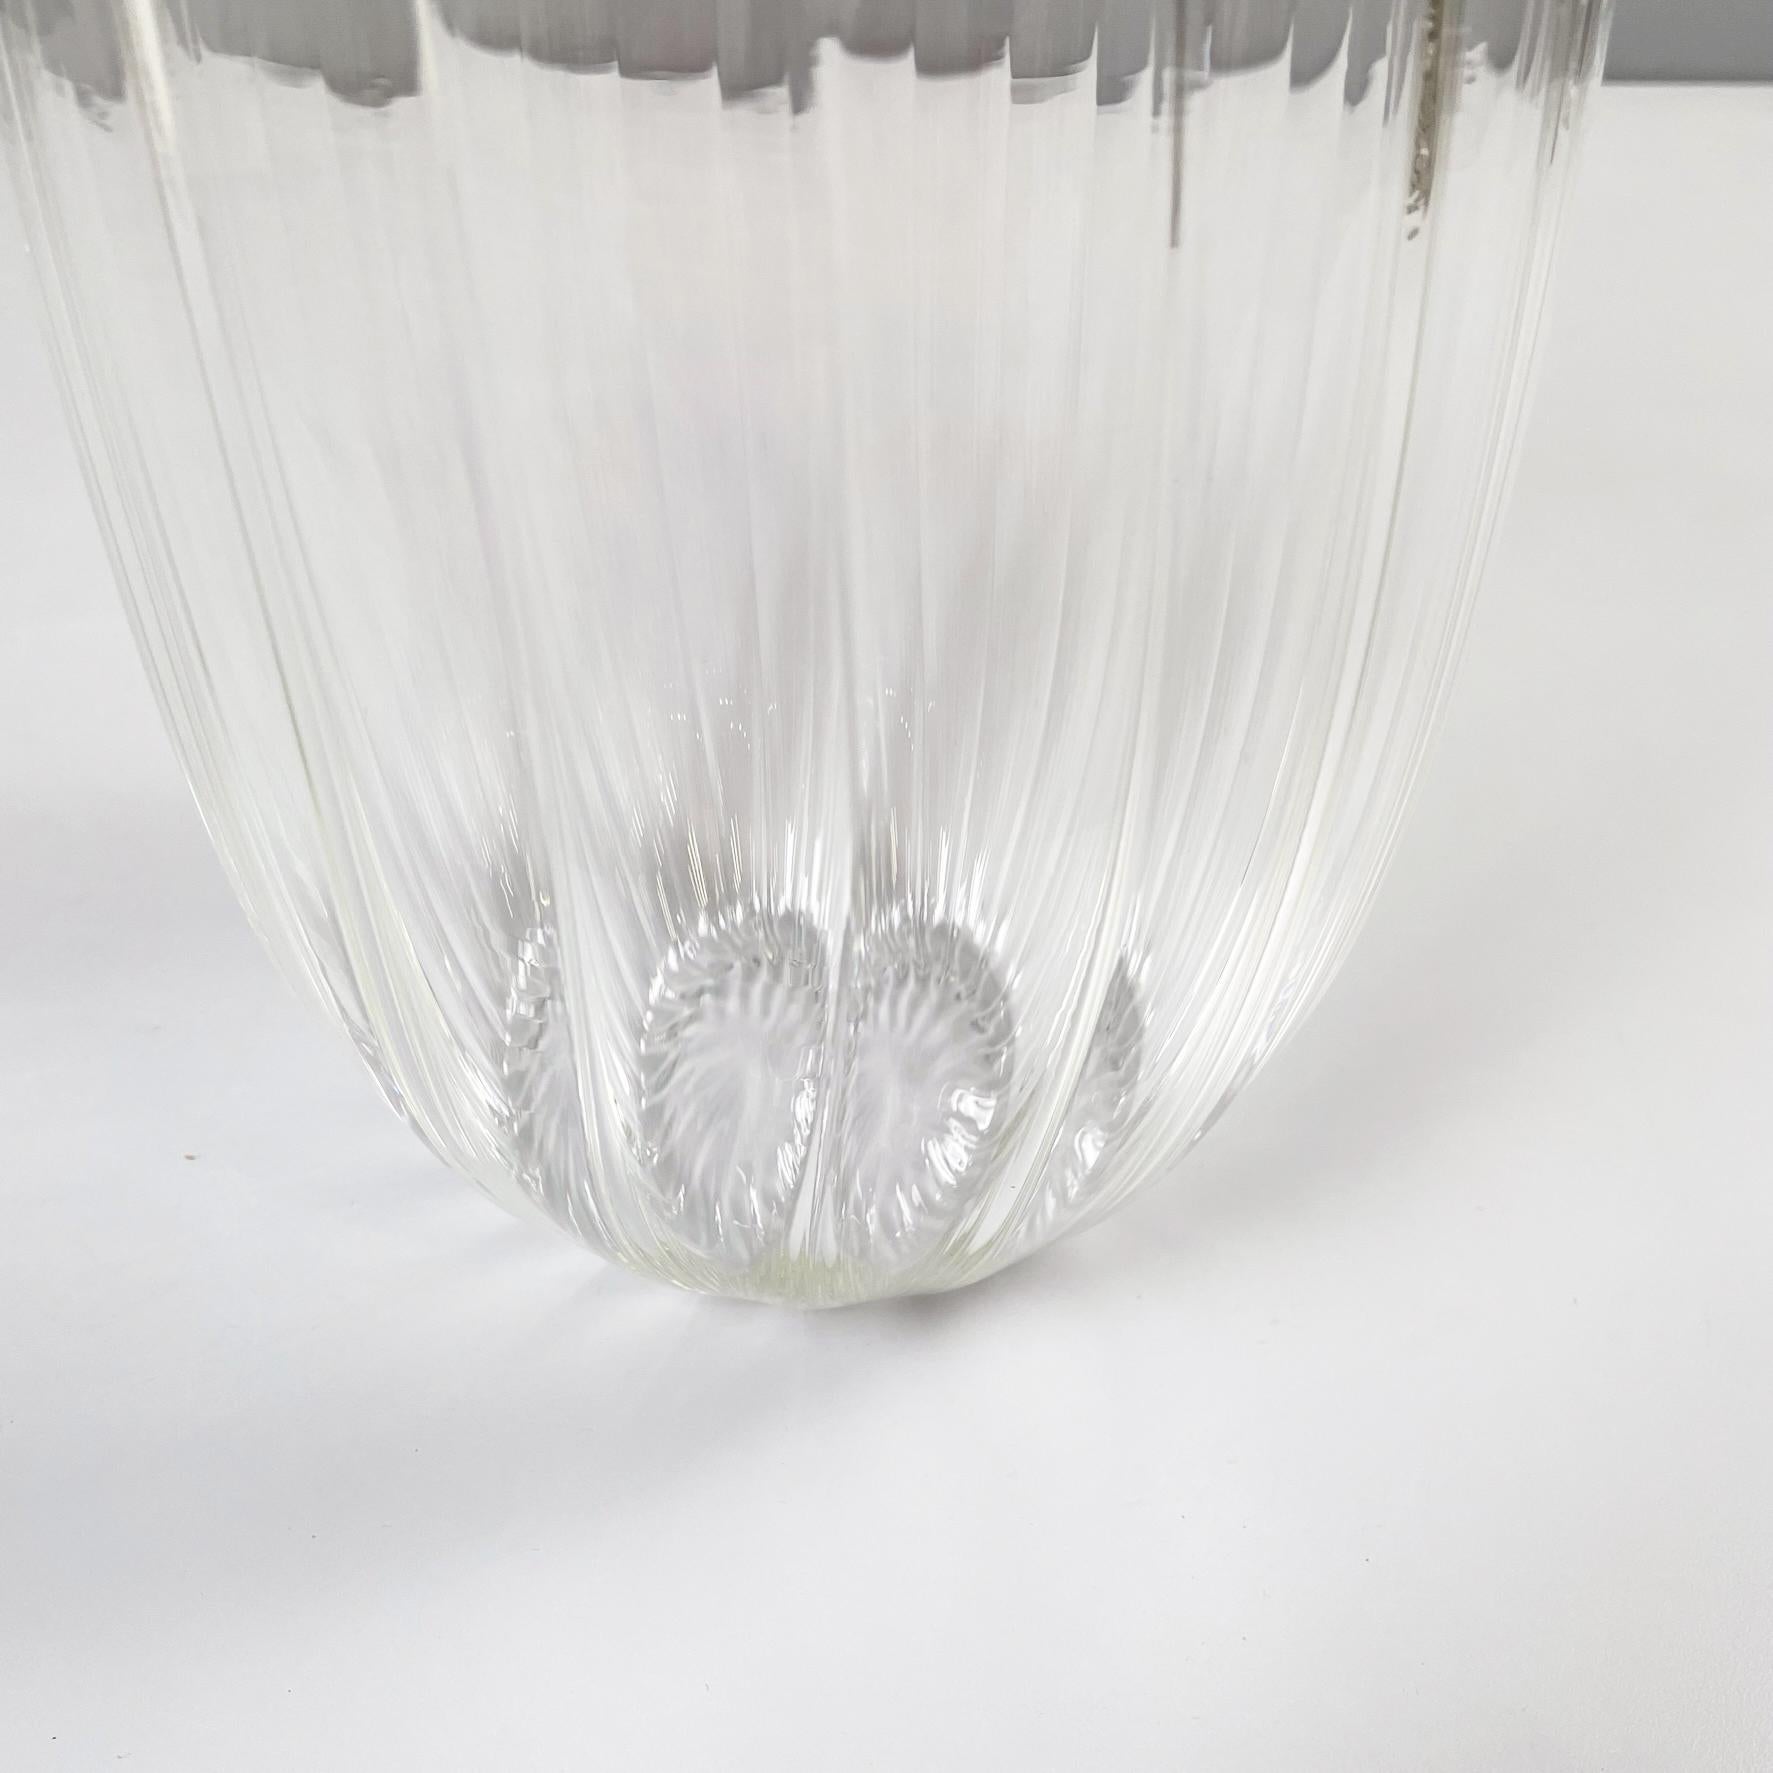 Italian modern Glass vase with round seed shape by Roberto Faccioli, 1990s For Sale 5